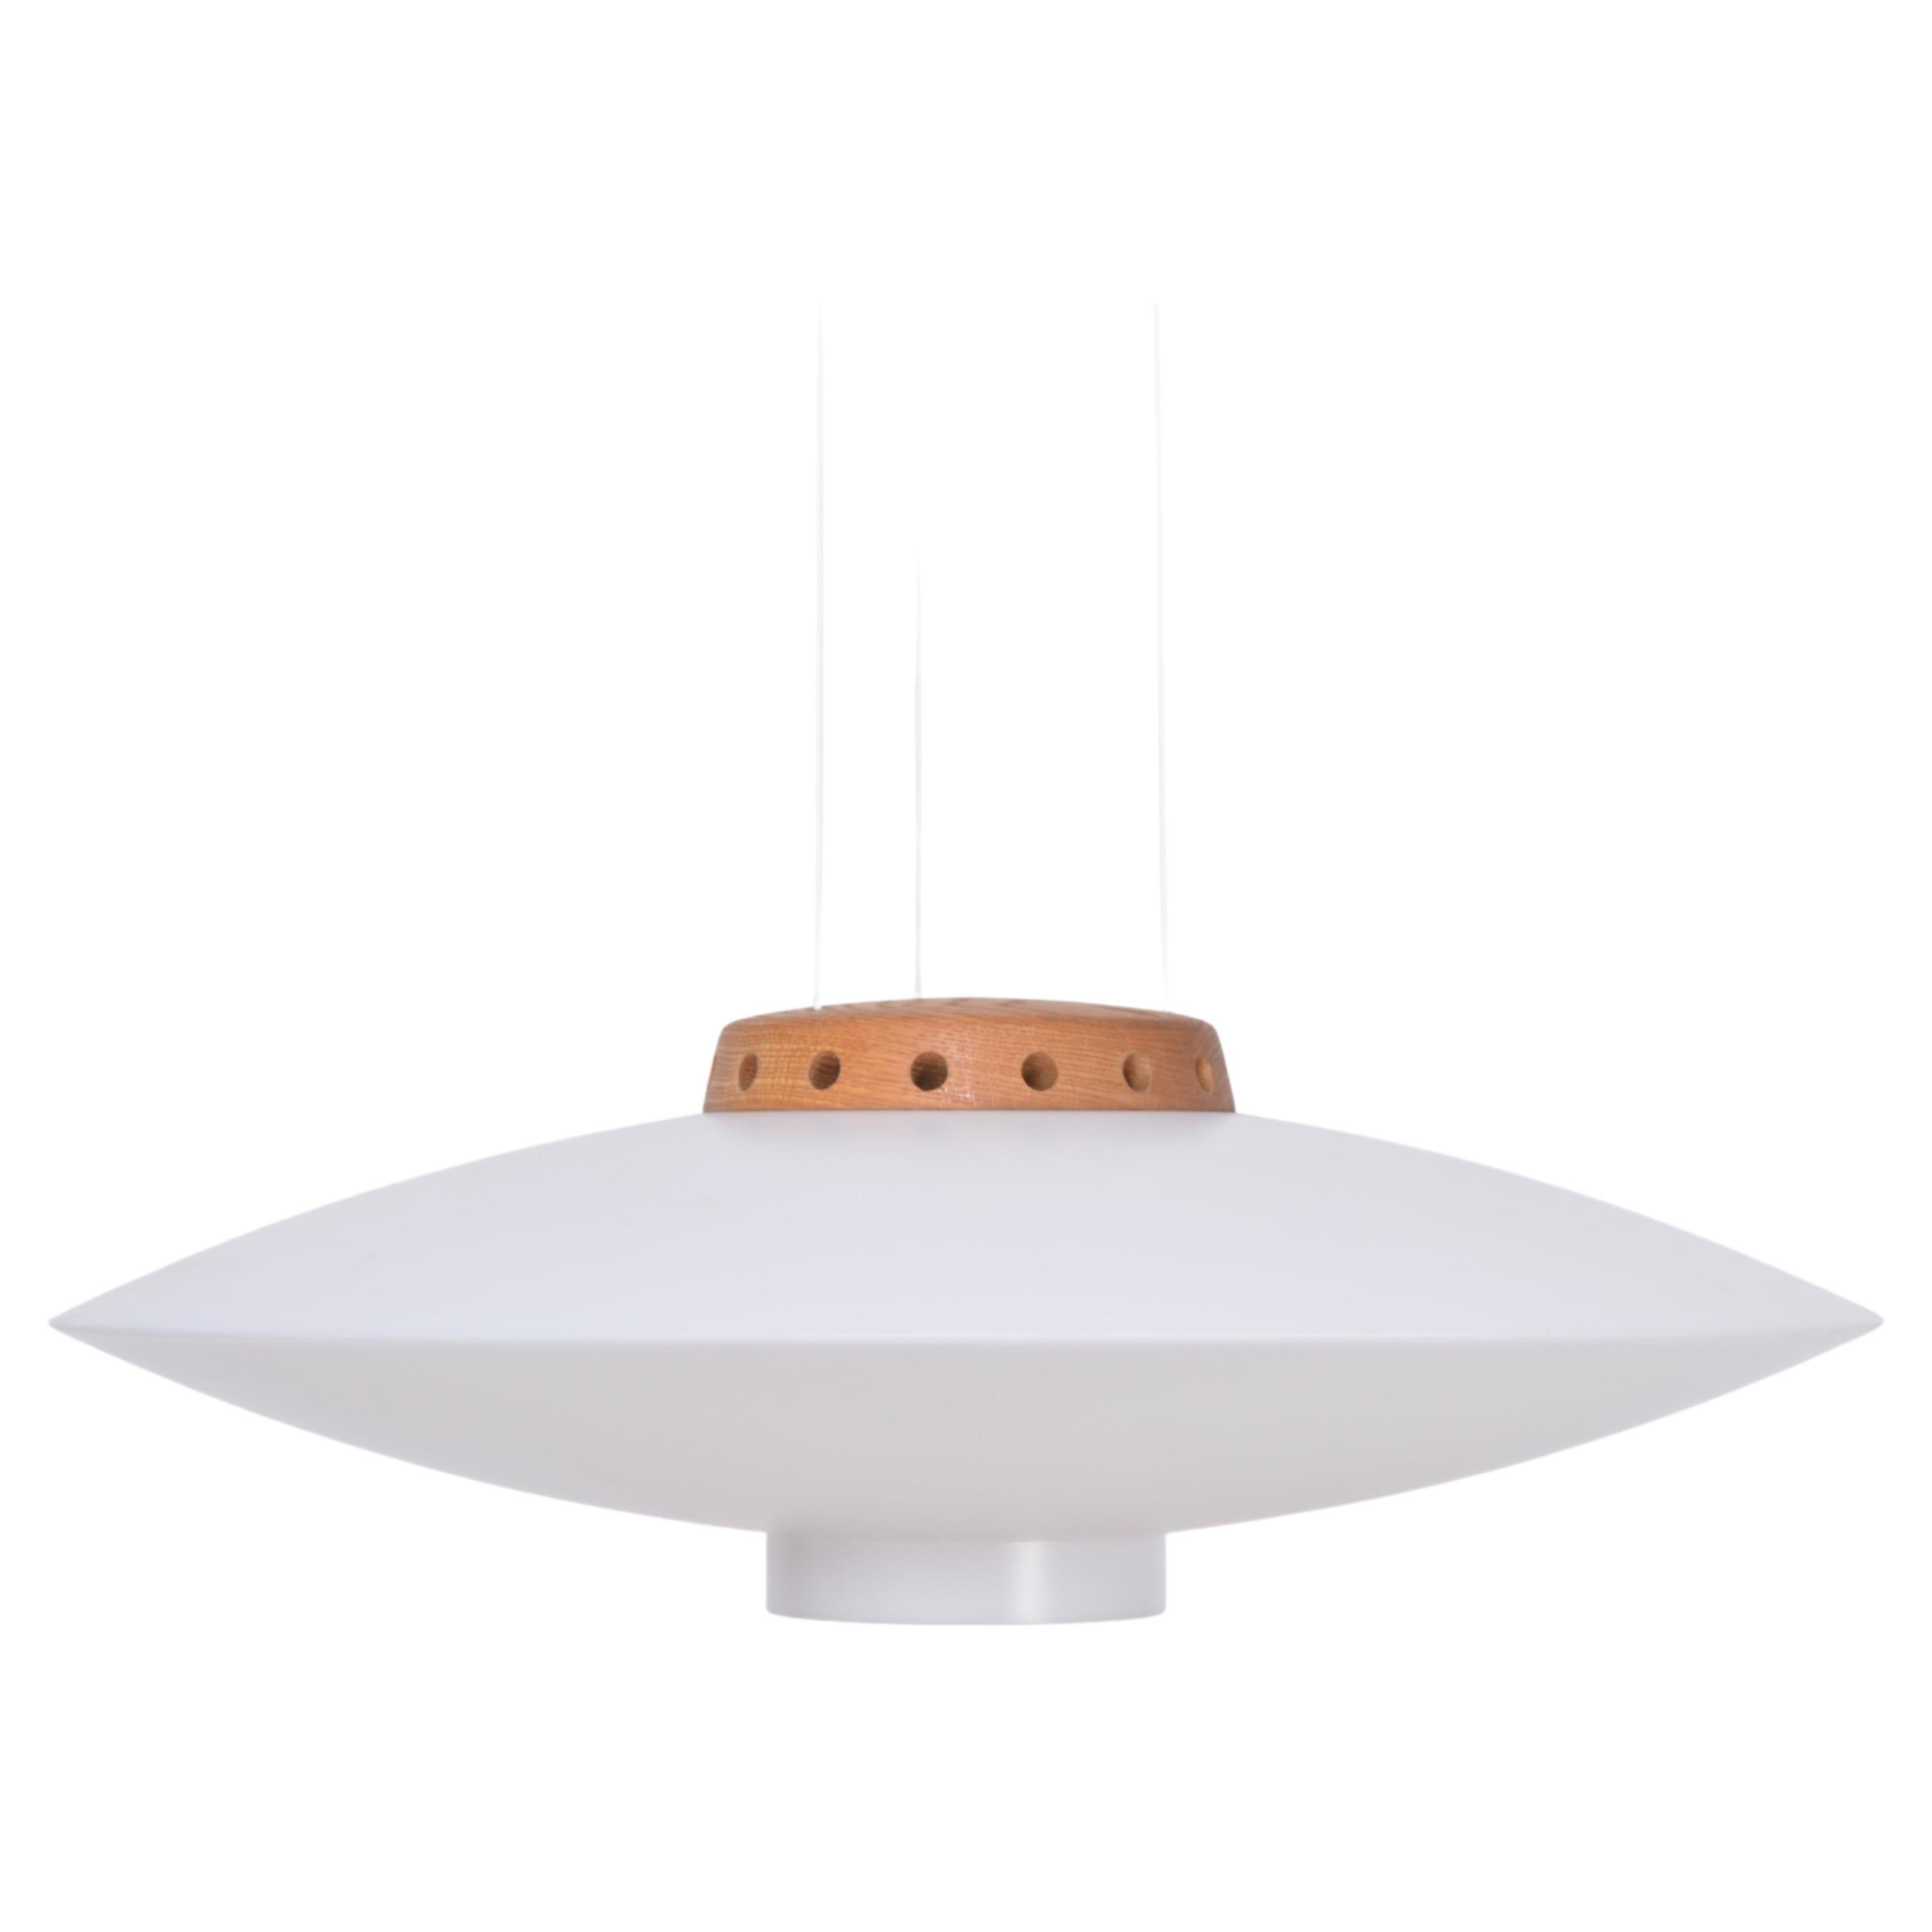 White Mid-Century Modern Pendant Model "Ufo" by Uno and Östen Kristiansson For Sale